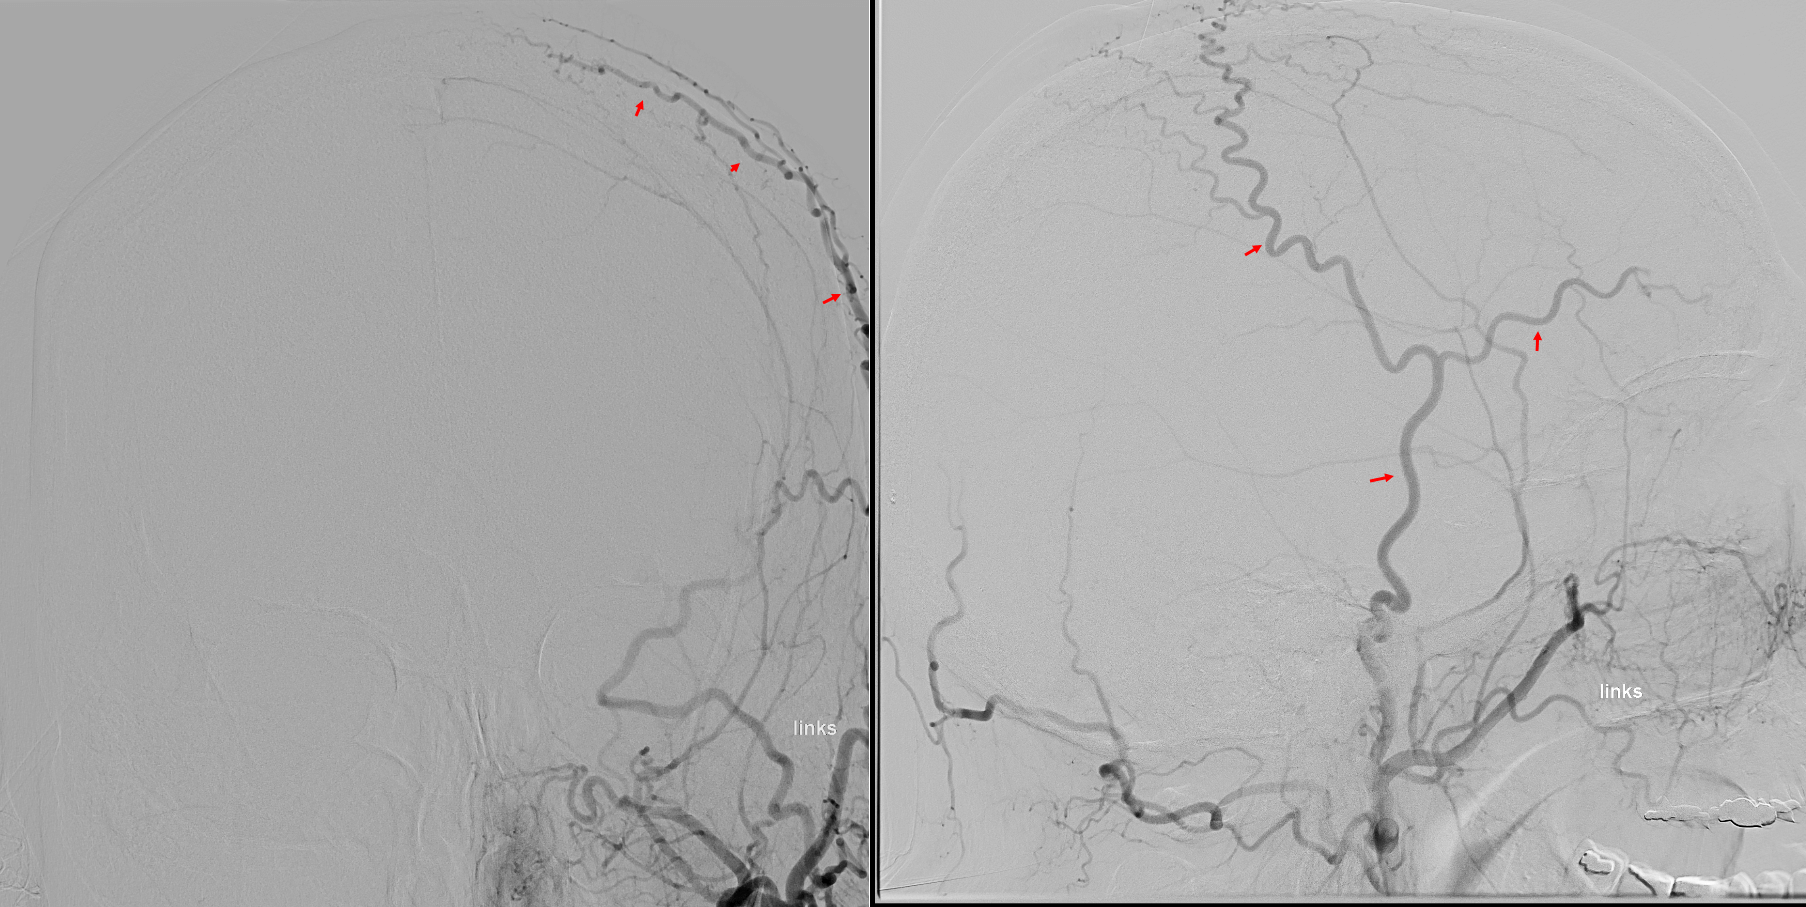 r/Radiology - Angiography Image of the superficial temporal artery (STA)